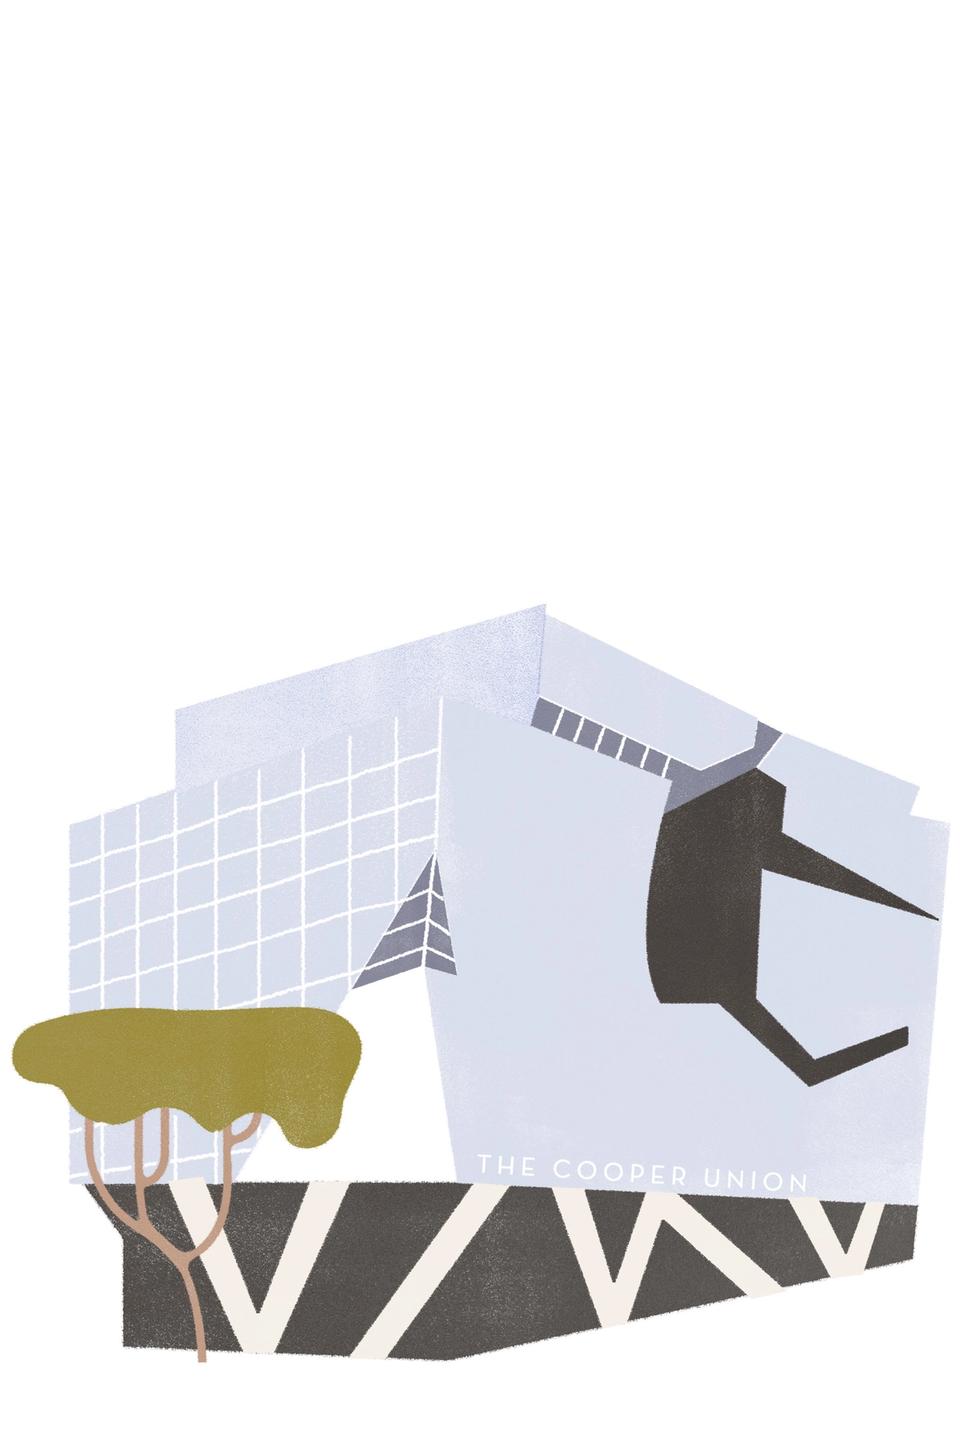 Illustration of the Cooper Union building in New York representing deconstructivism style of architecture